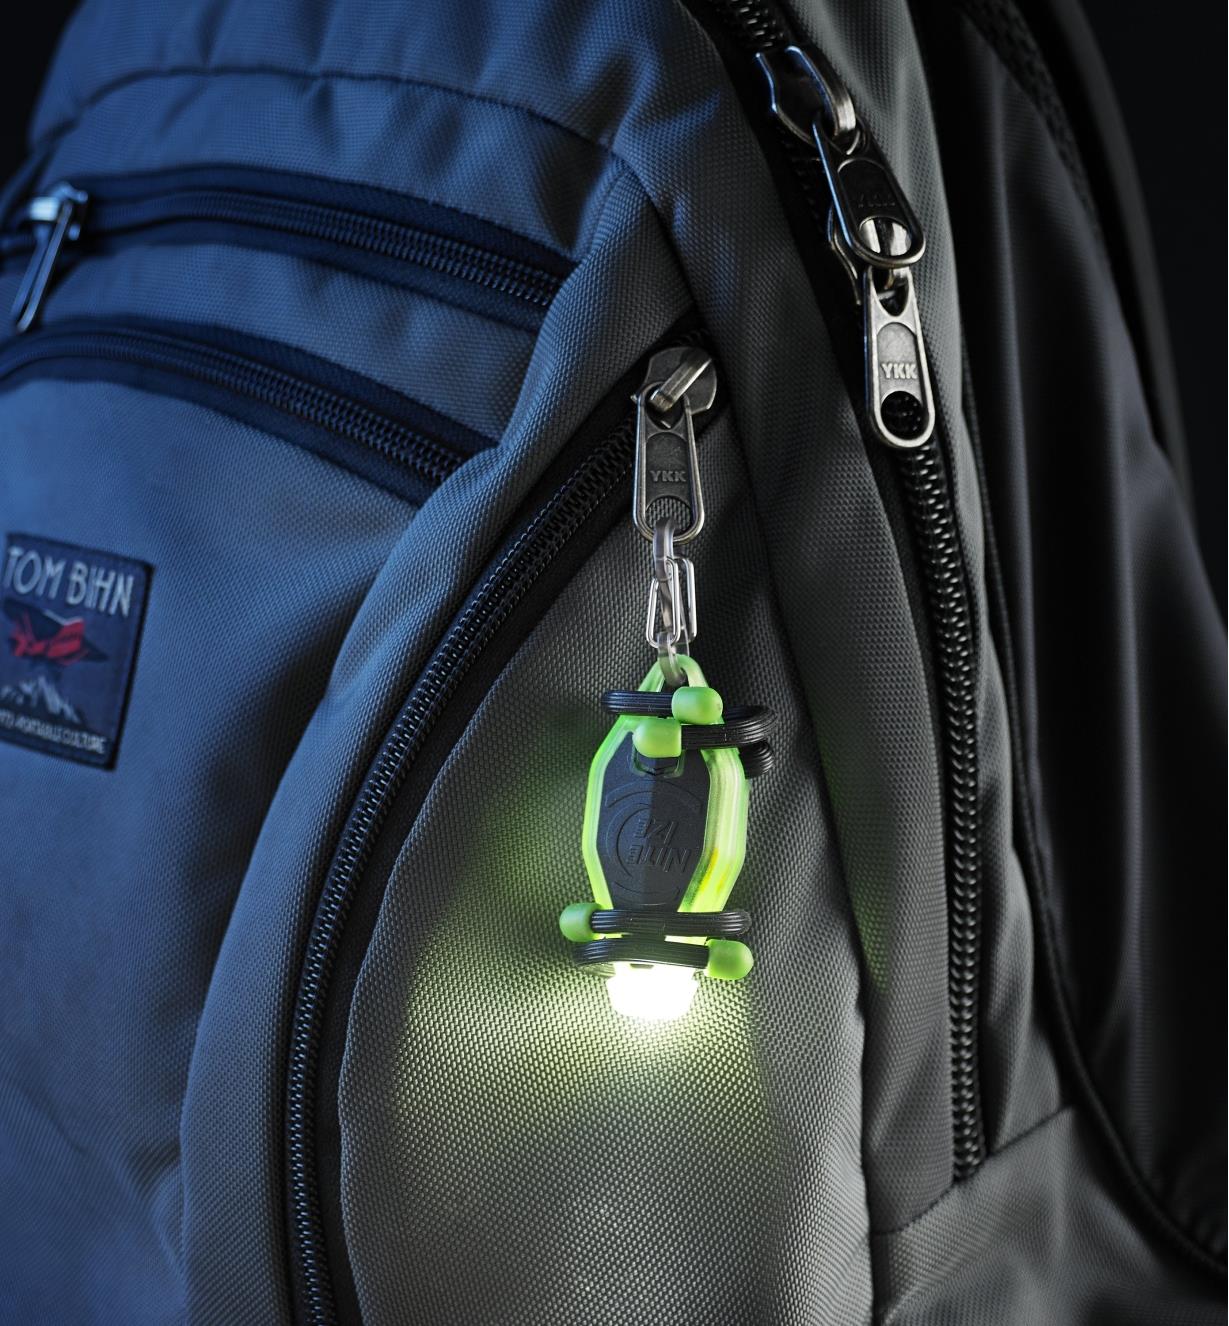 A BugLit rechargeable flashlight hung by the included carabiner on the zipper tab of a backpack